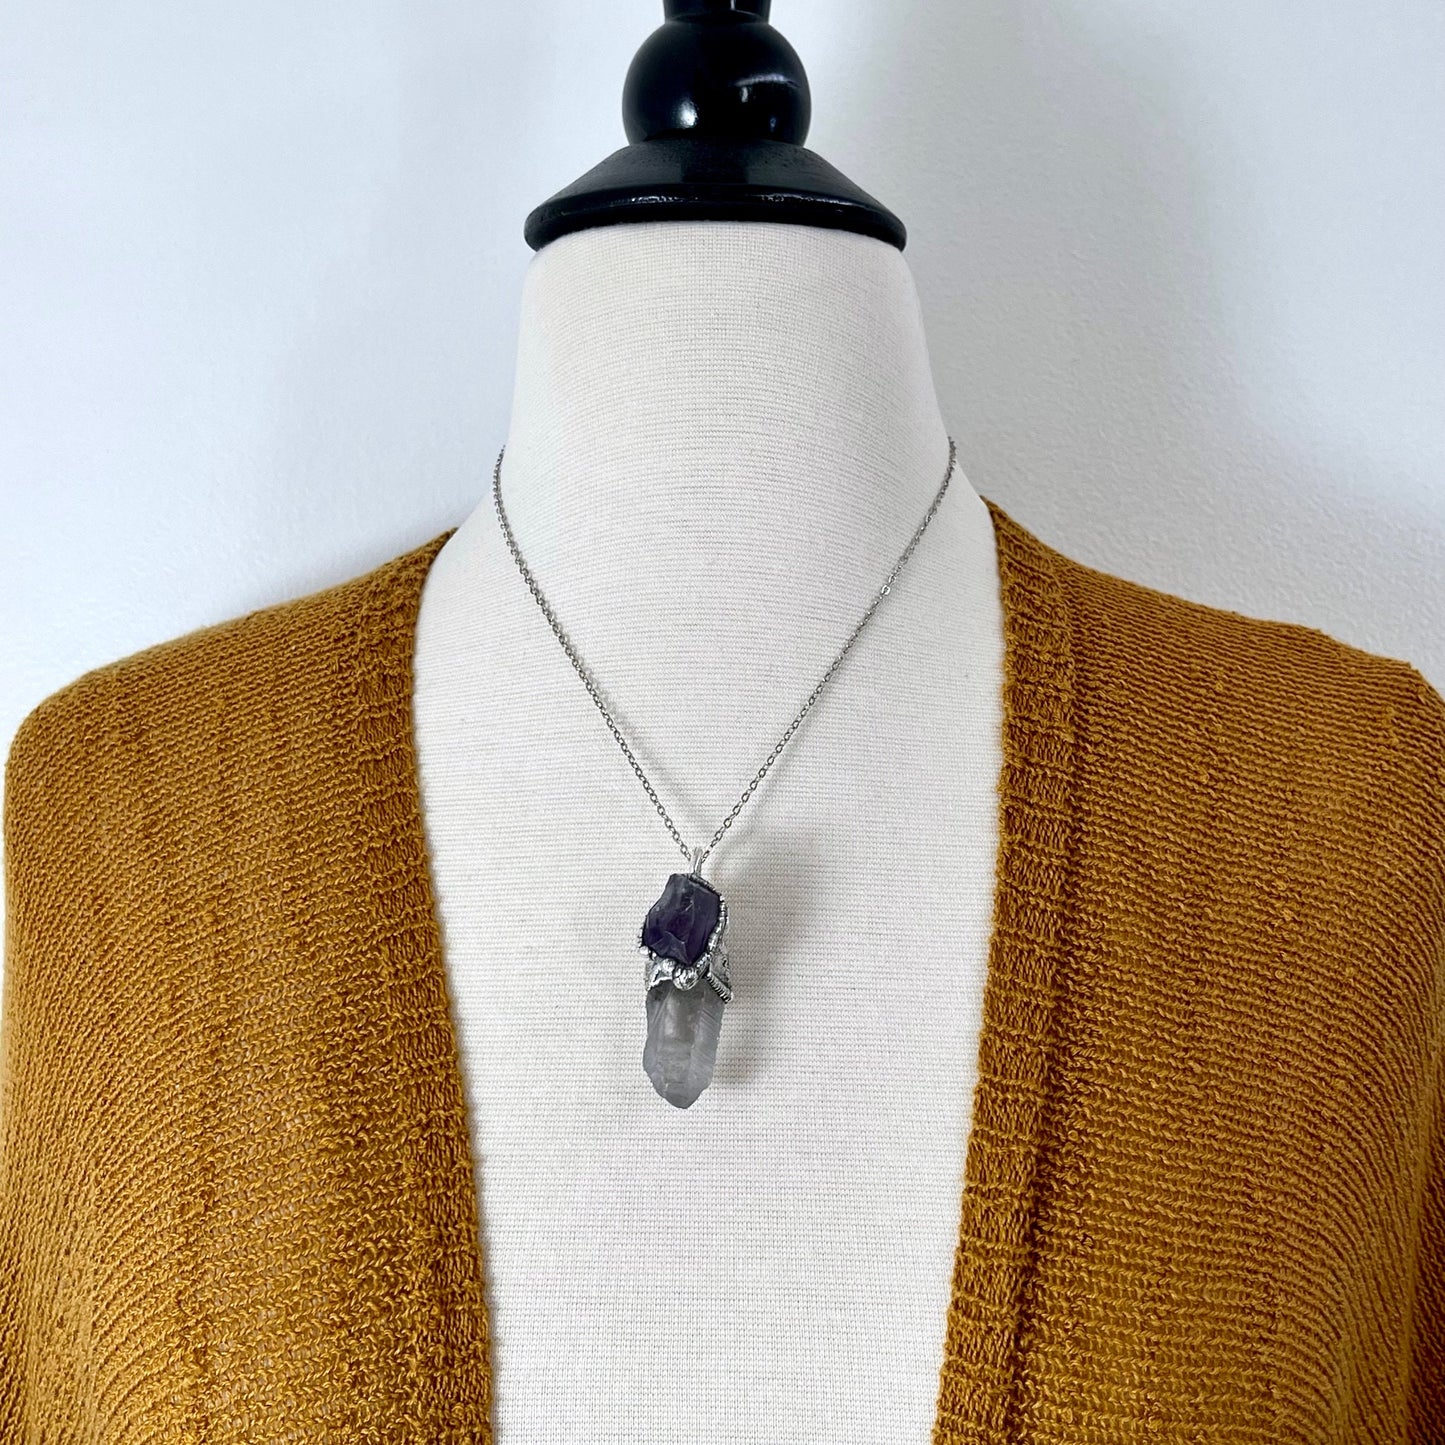 Raw Clear Quartz & Purple Amethyst Crystal Statement Necklace in Fine Silver / Foxlark Collection - One of a Kind - Foxlark Crystal Jewelry